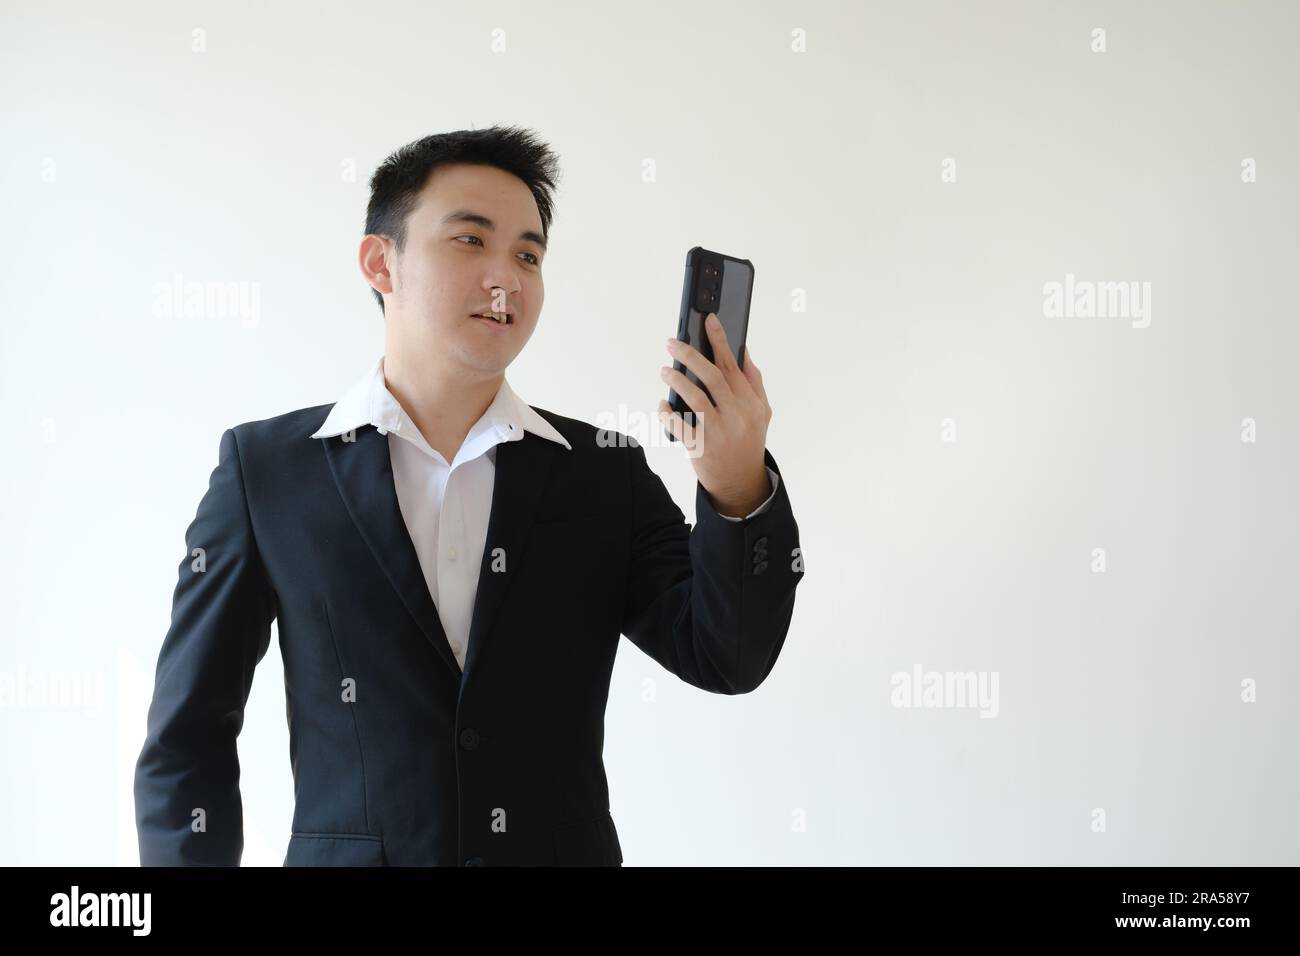 Young Asian business man with unpleasant face expression doing video call on his smartphone. Isolated white background. Suitable for advertisement. Stock Photo